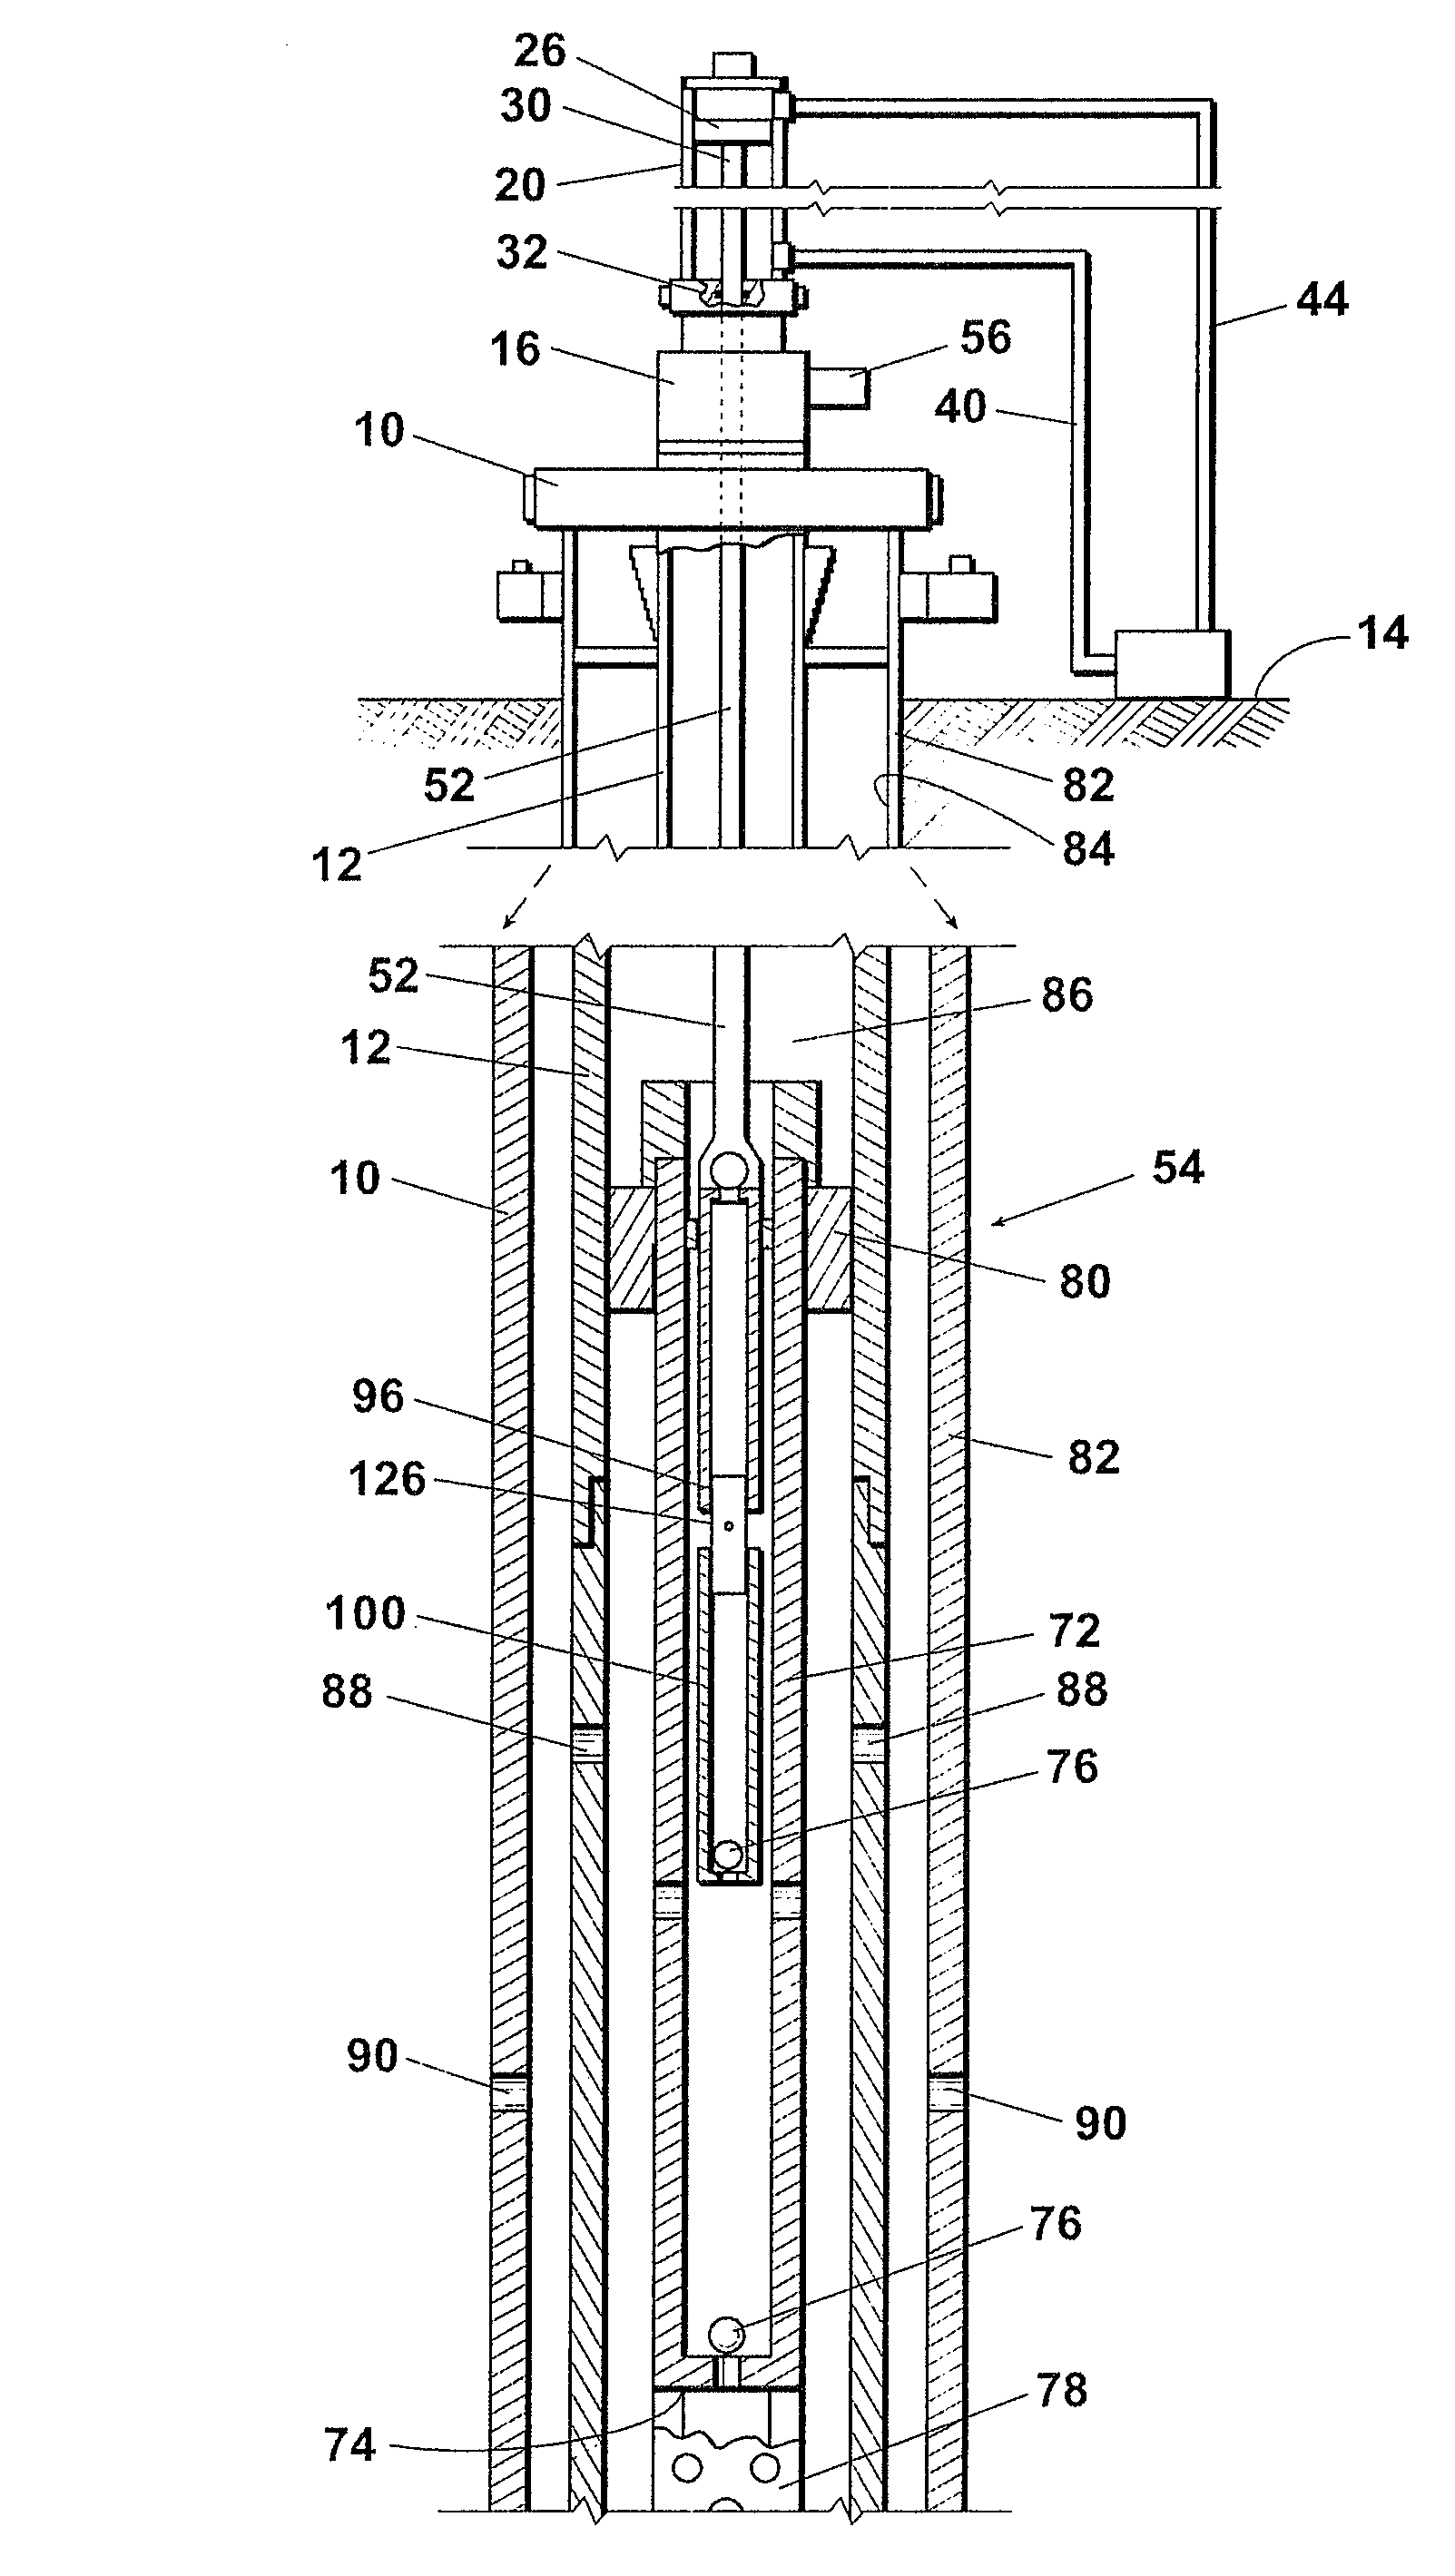 Reciprocated pump system for use in oil wells